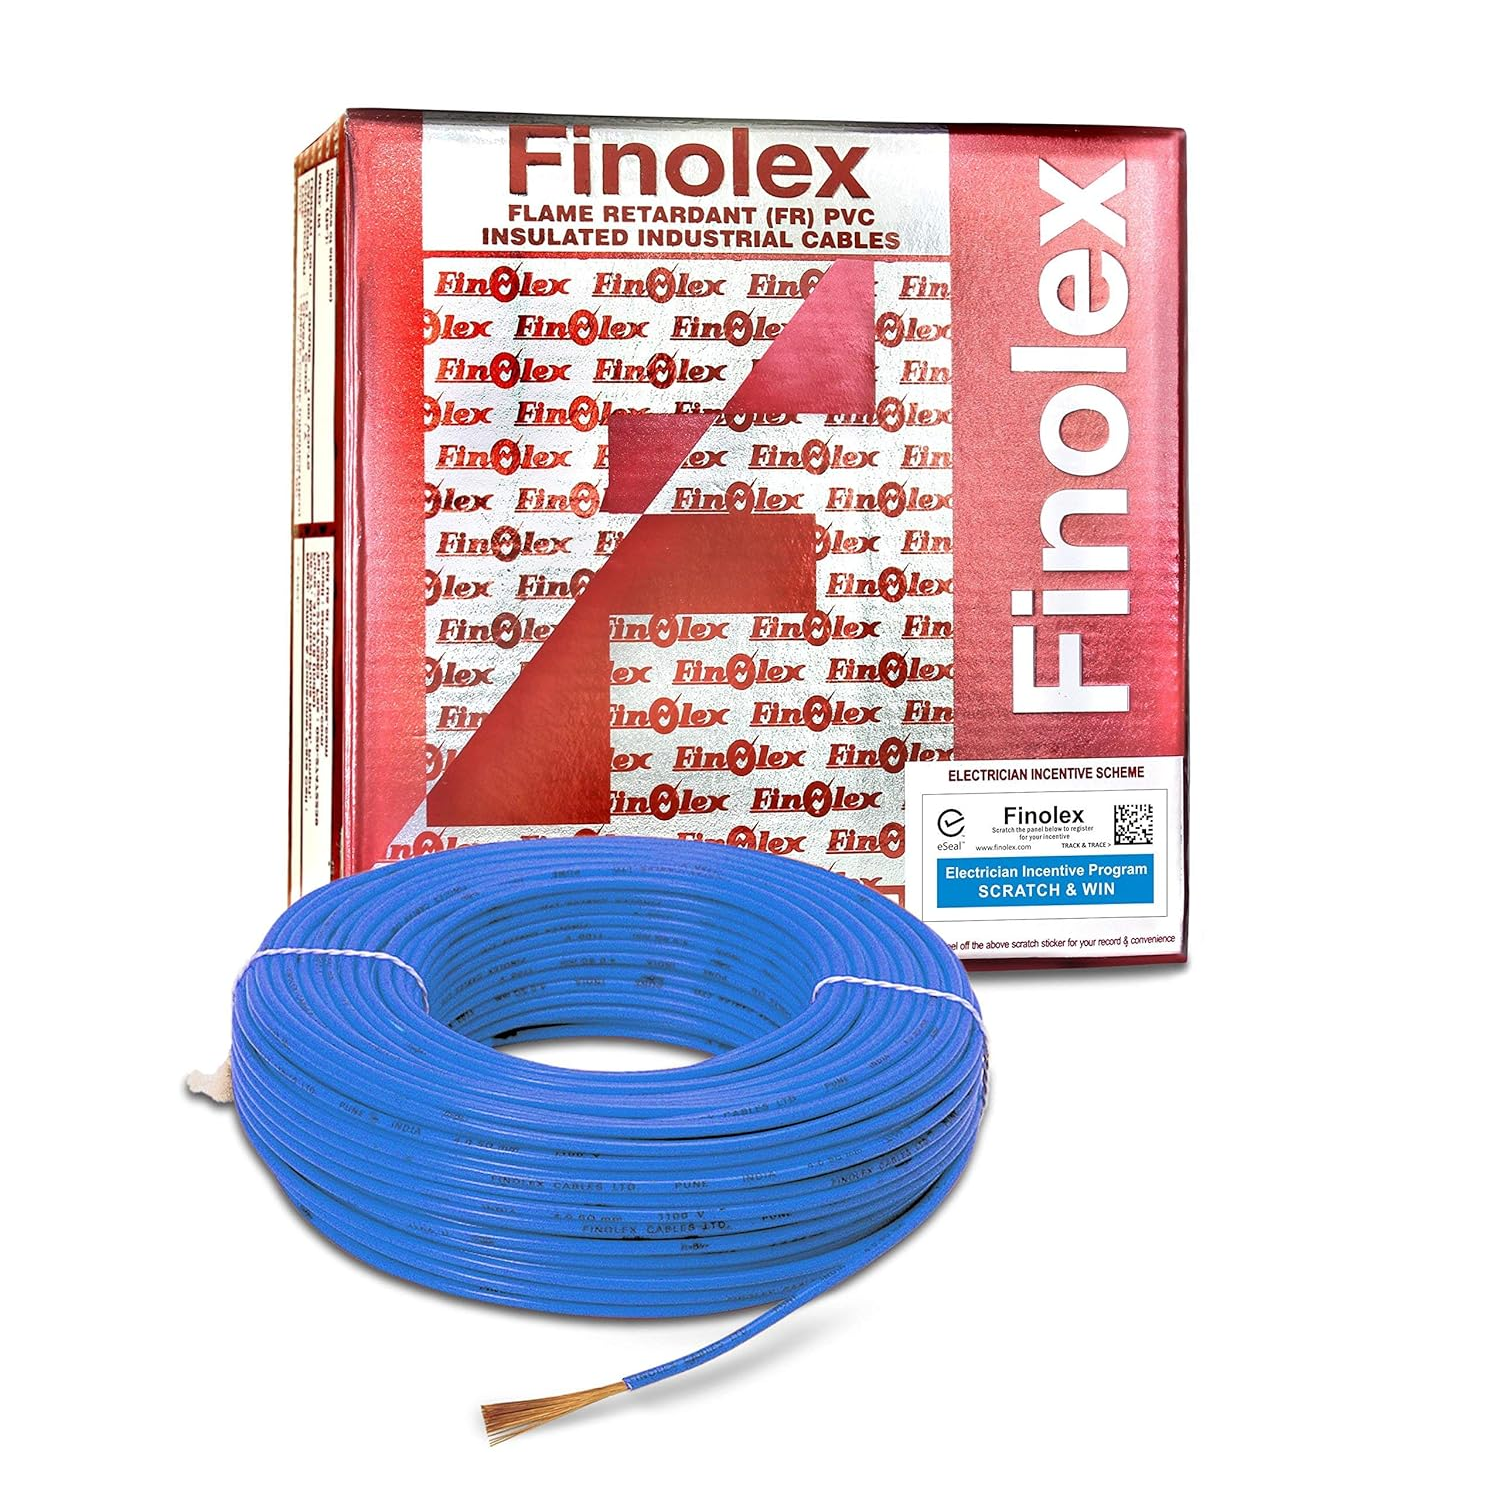 1.5 Sqmm Finolex FR Single Core Copper Wire (90 Mtr) With PVC Insulated for House 38 Industrial Uses